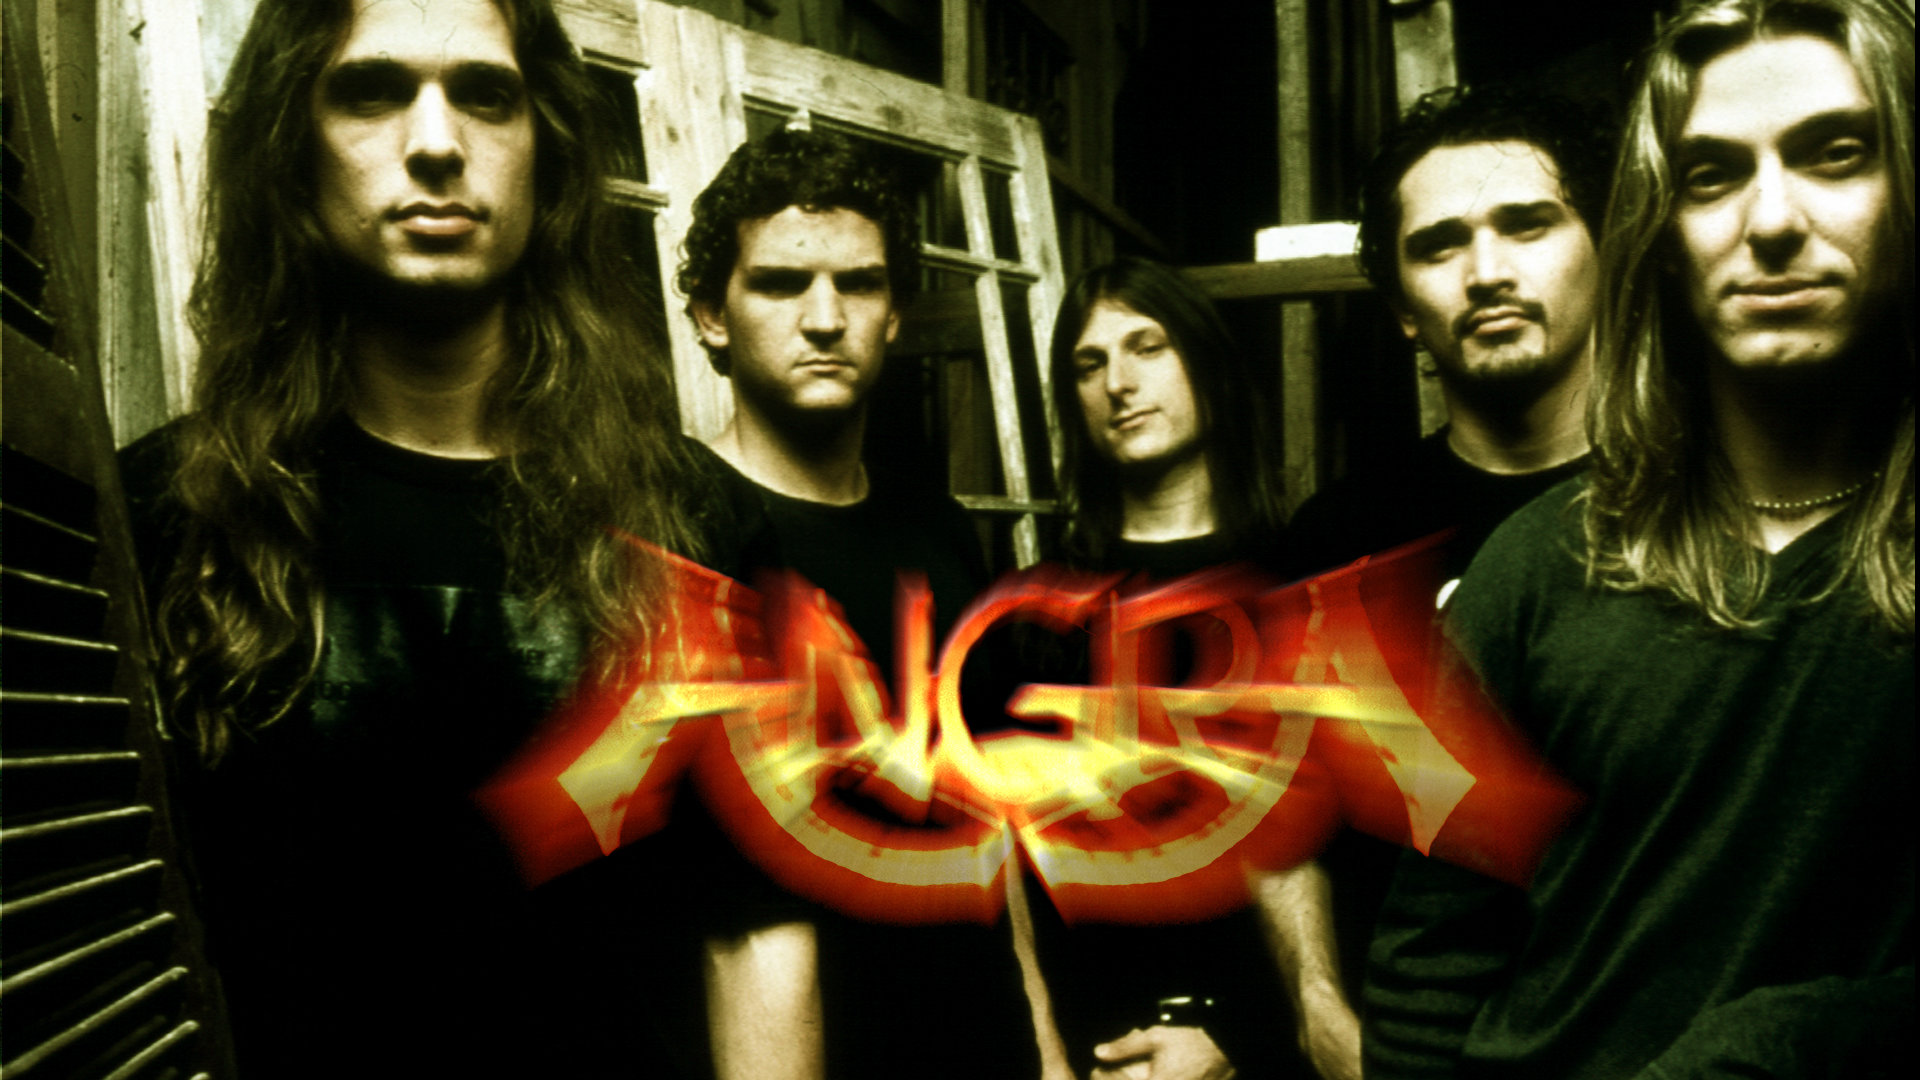 Download full hd 1920x1080 Angra desktop background ID:119443 for free